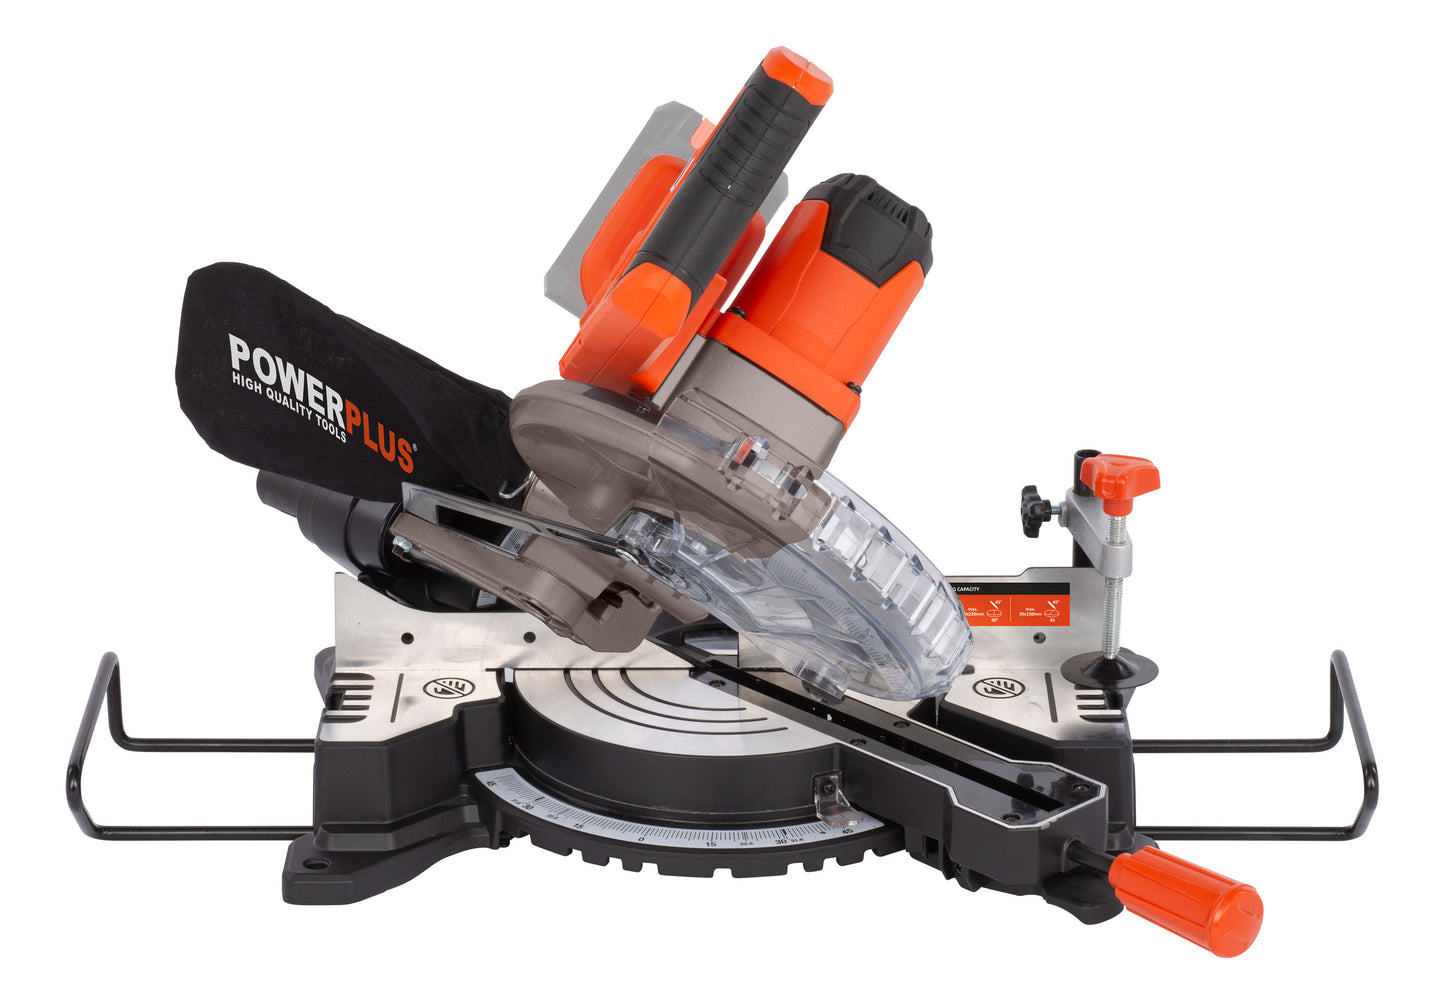 Dual Power - 20V Cordless Telescopic Mitre Saw - 60mm (unit only)